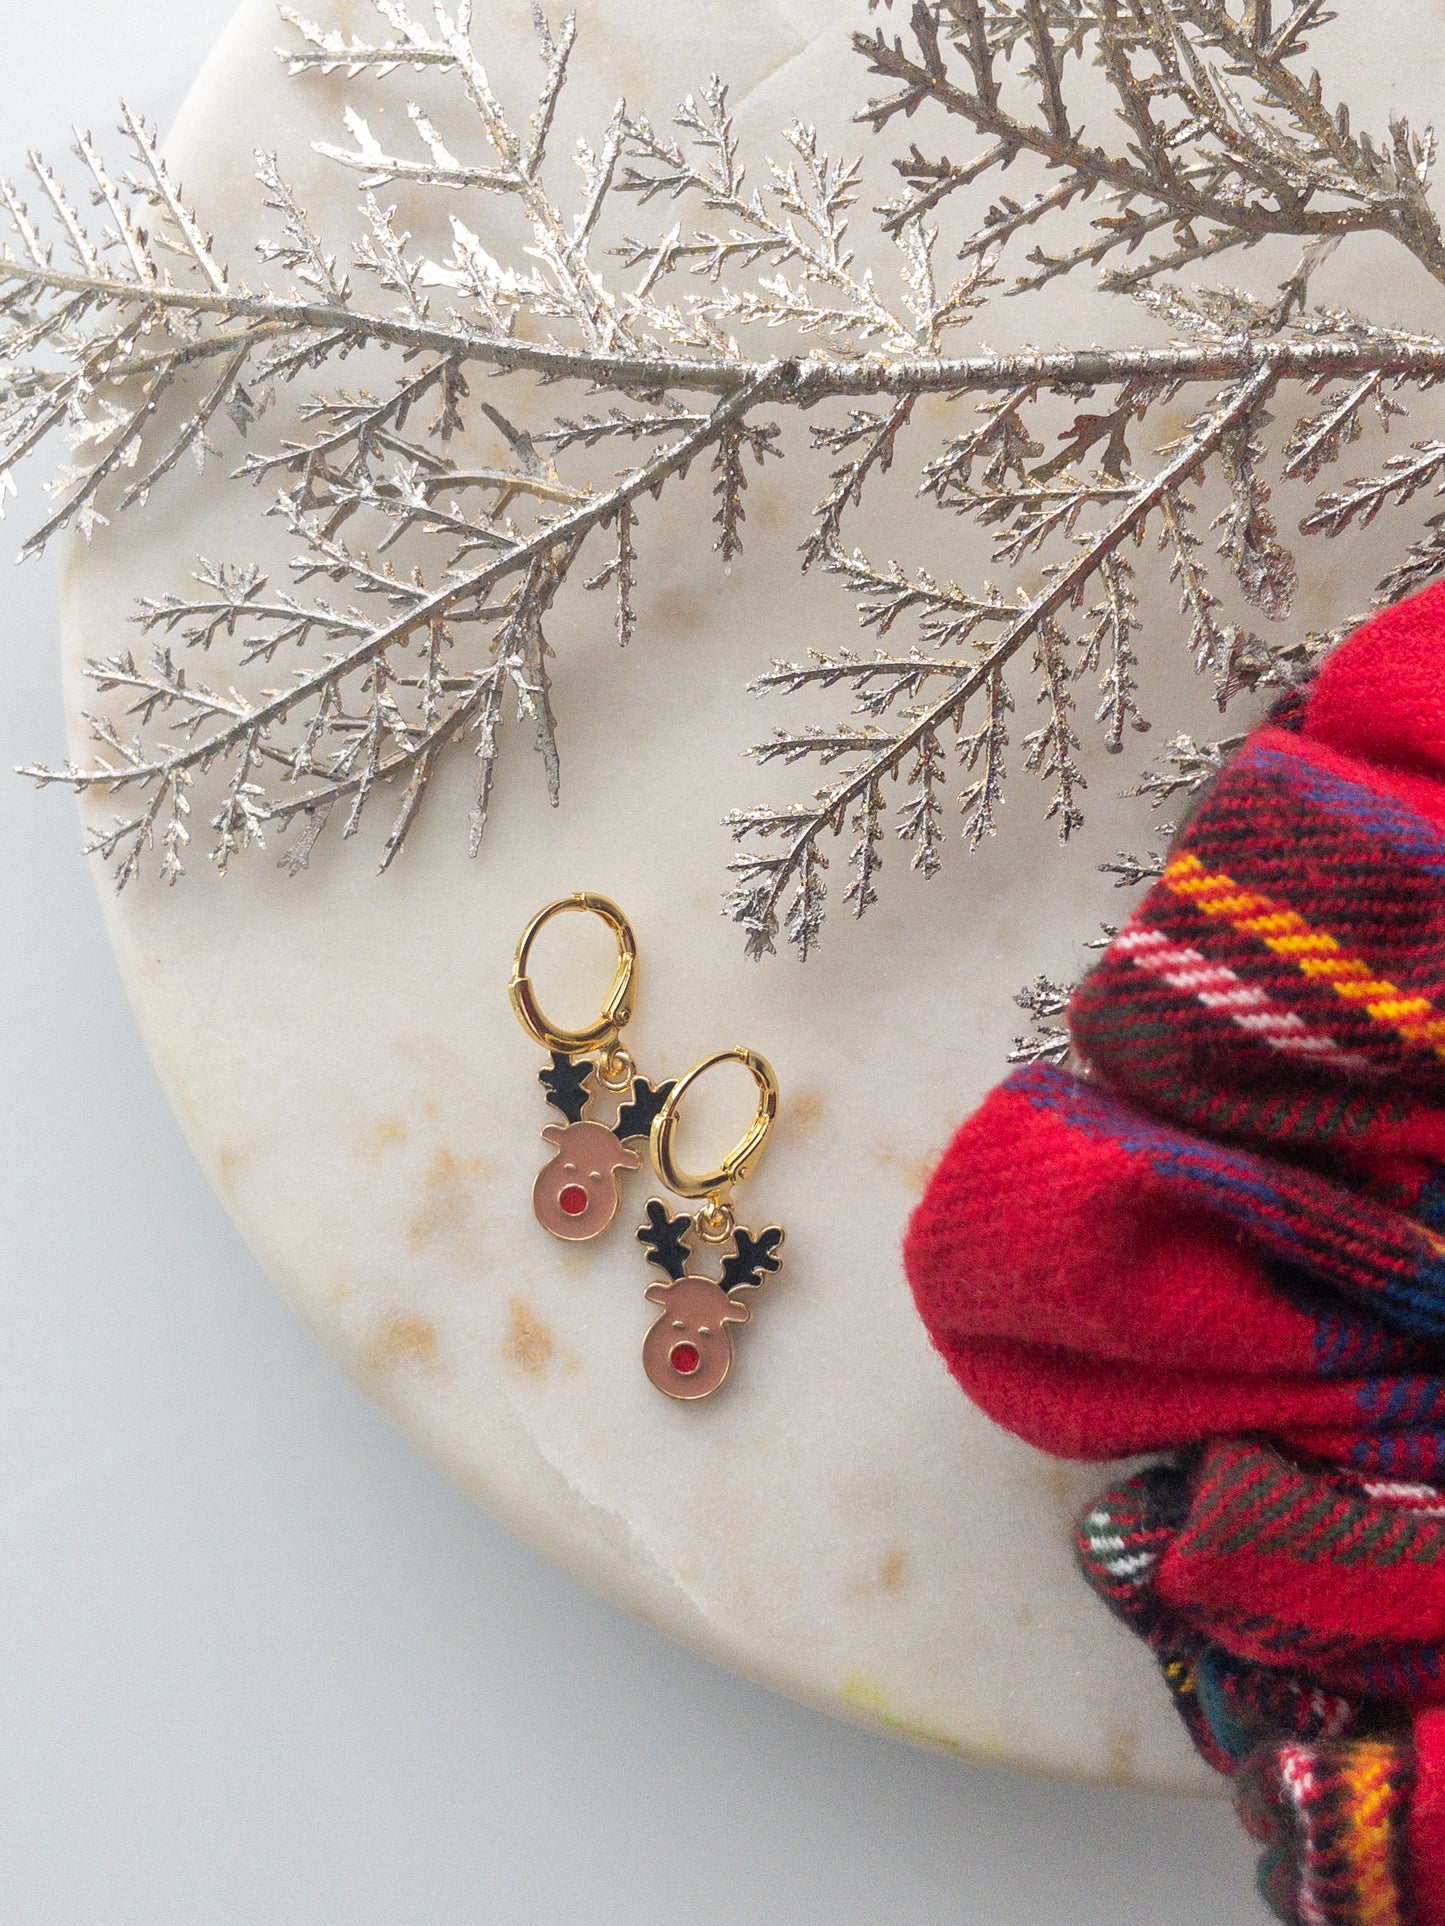 gold charm earrings | Rudolph the reindeer